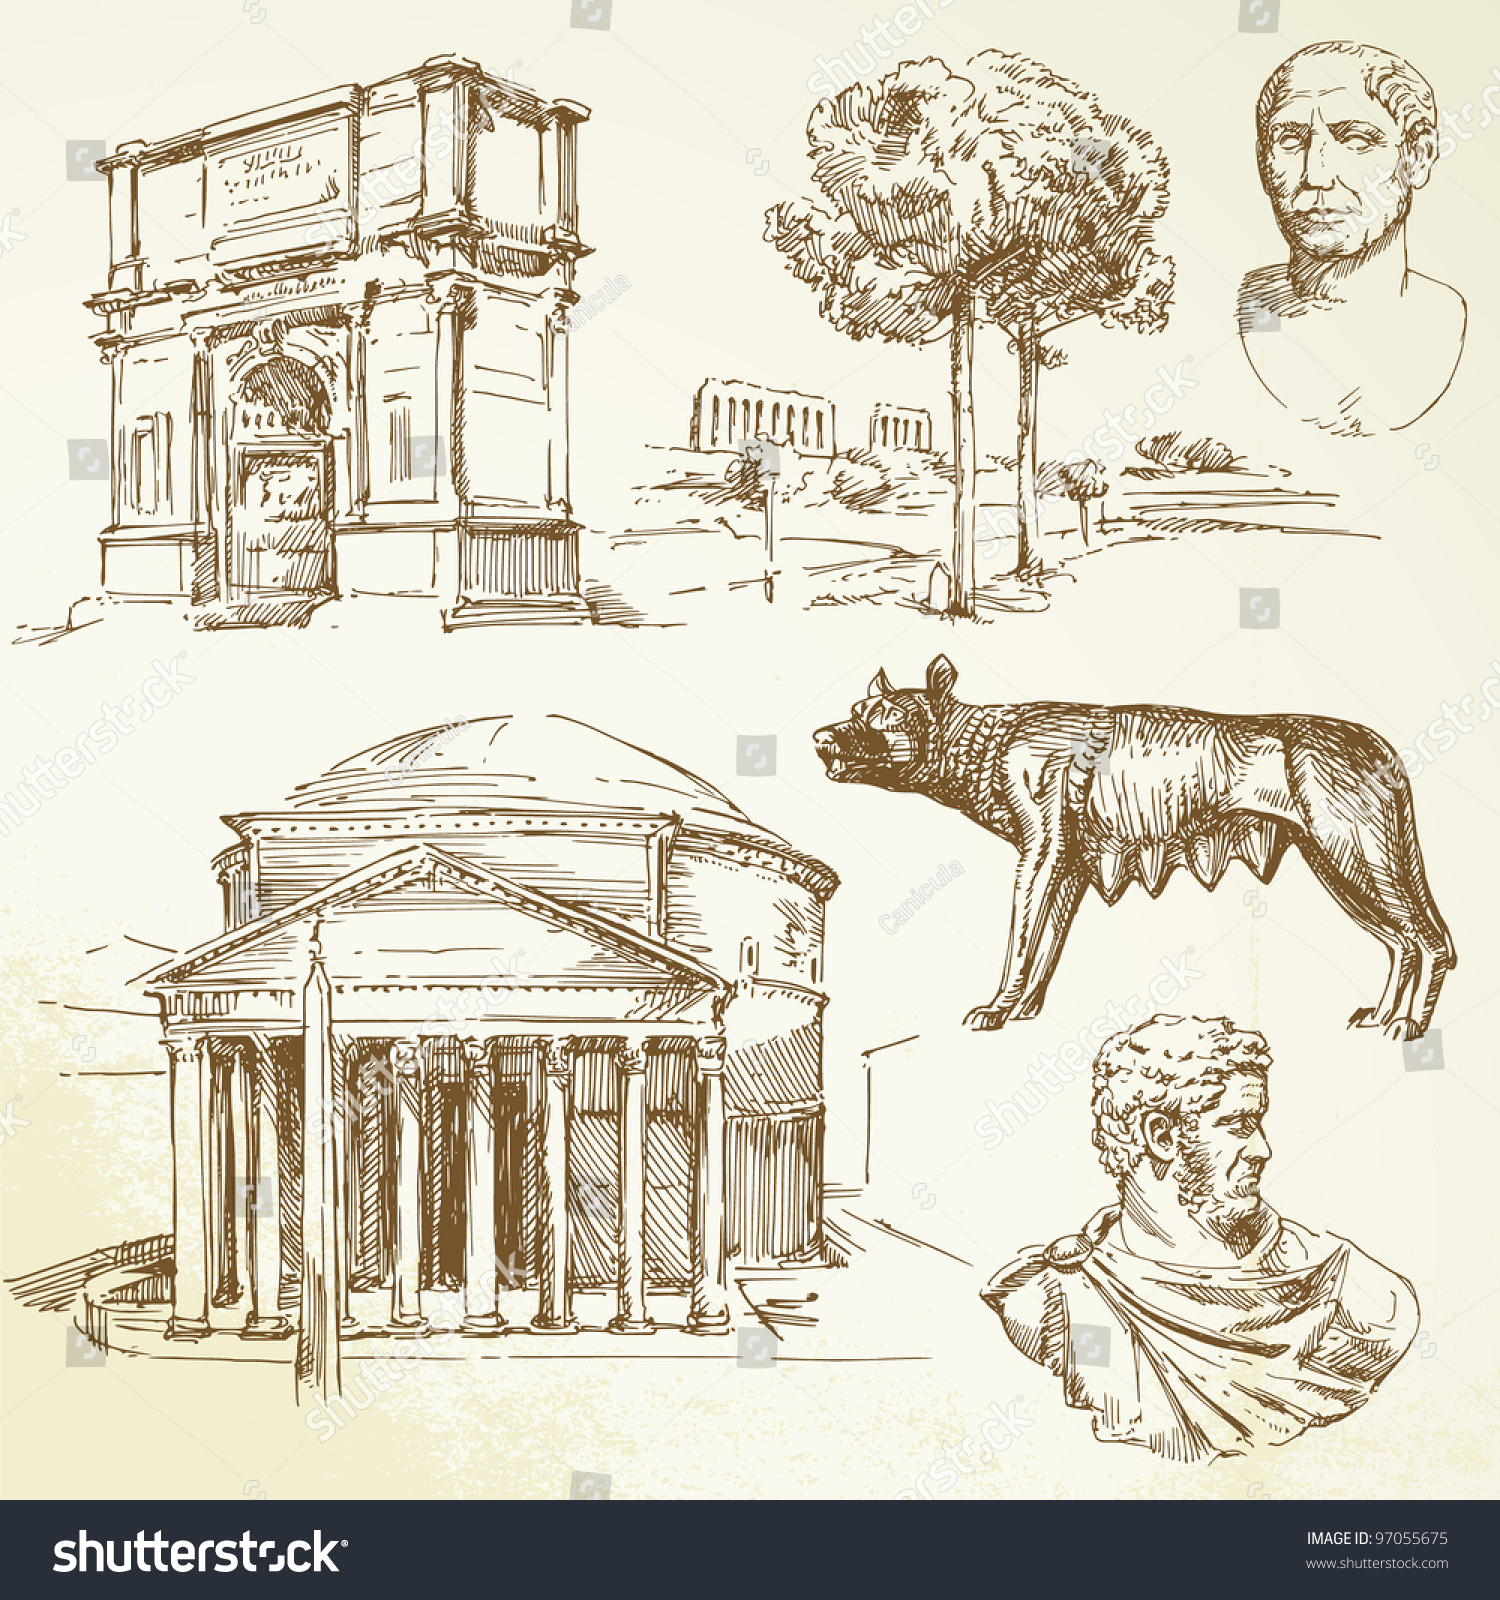 Ancient Rome Hand Drawn Set Stock Vector 97055675 - Shutterstock